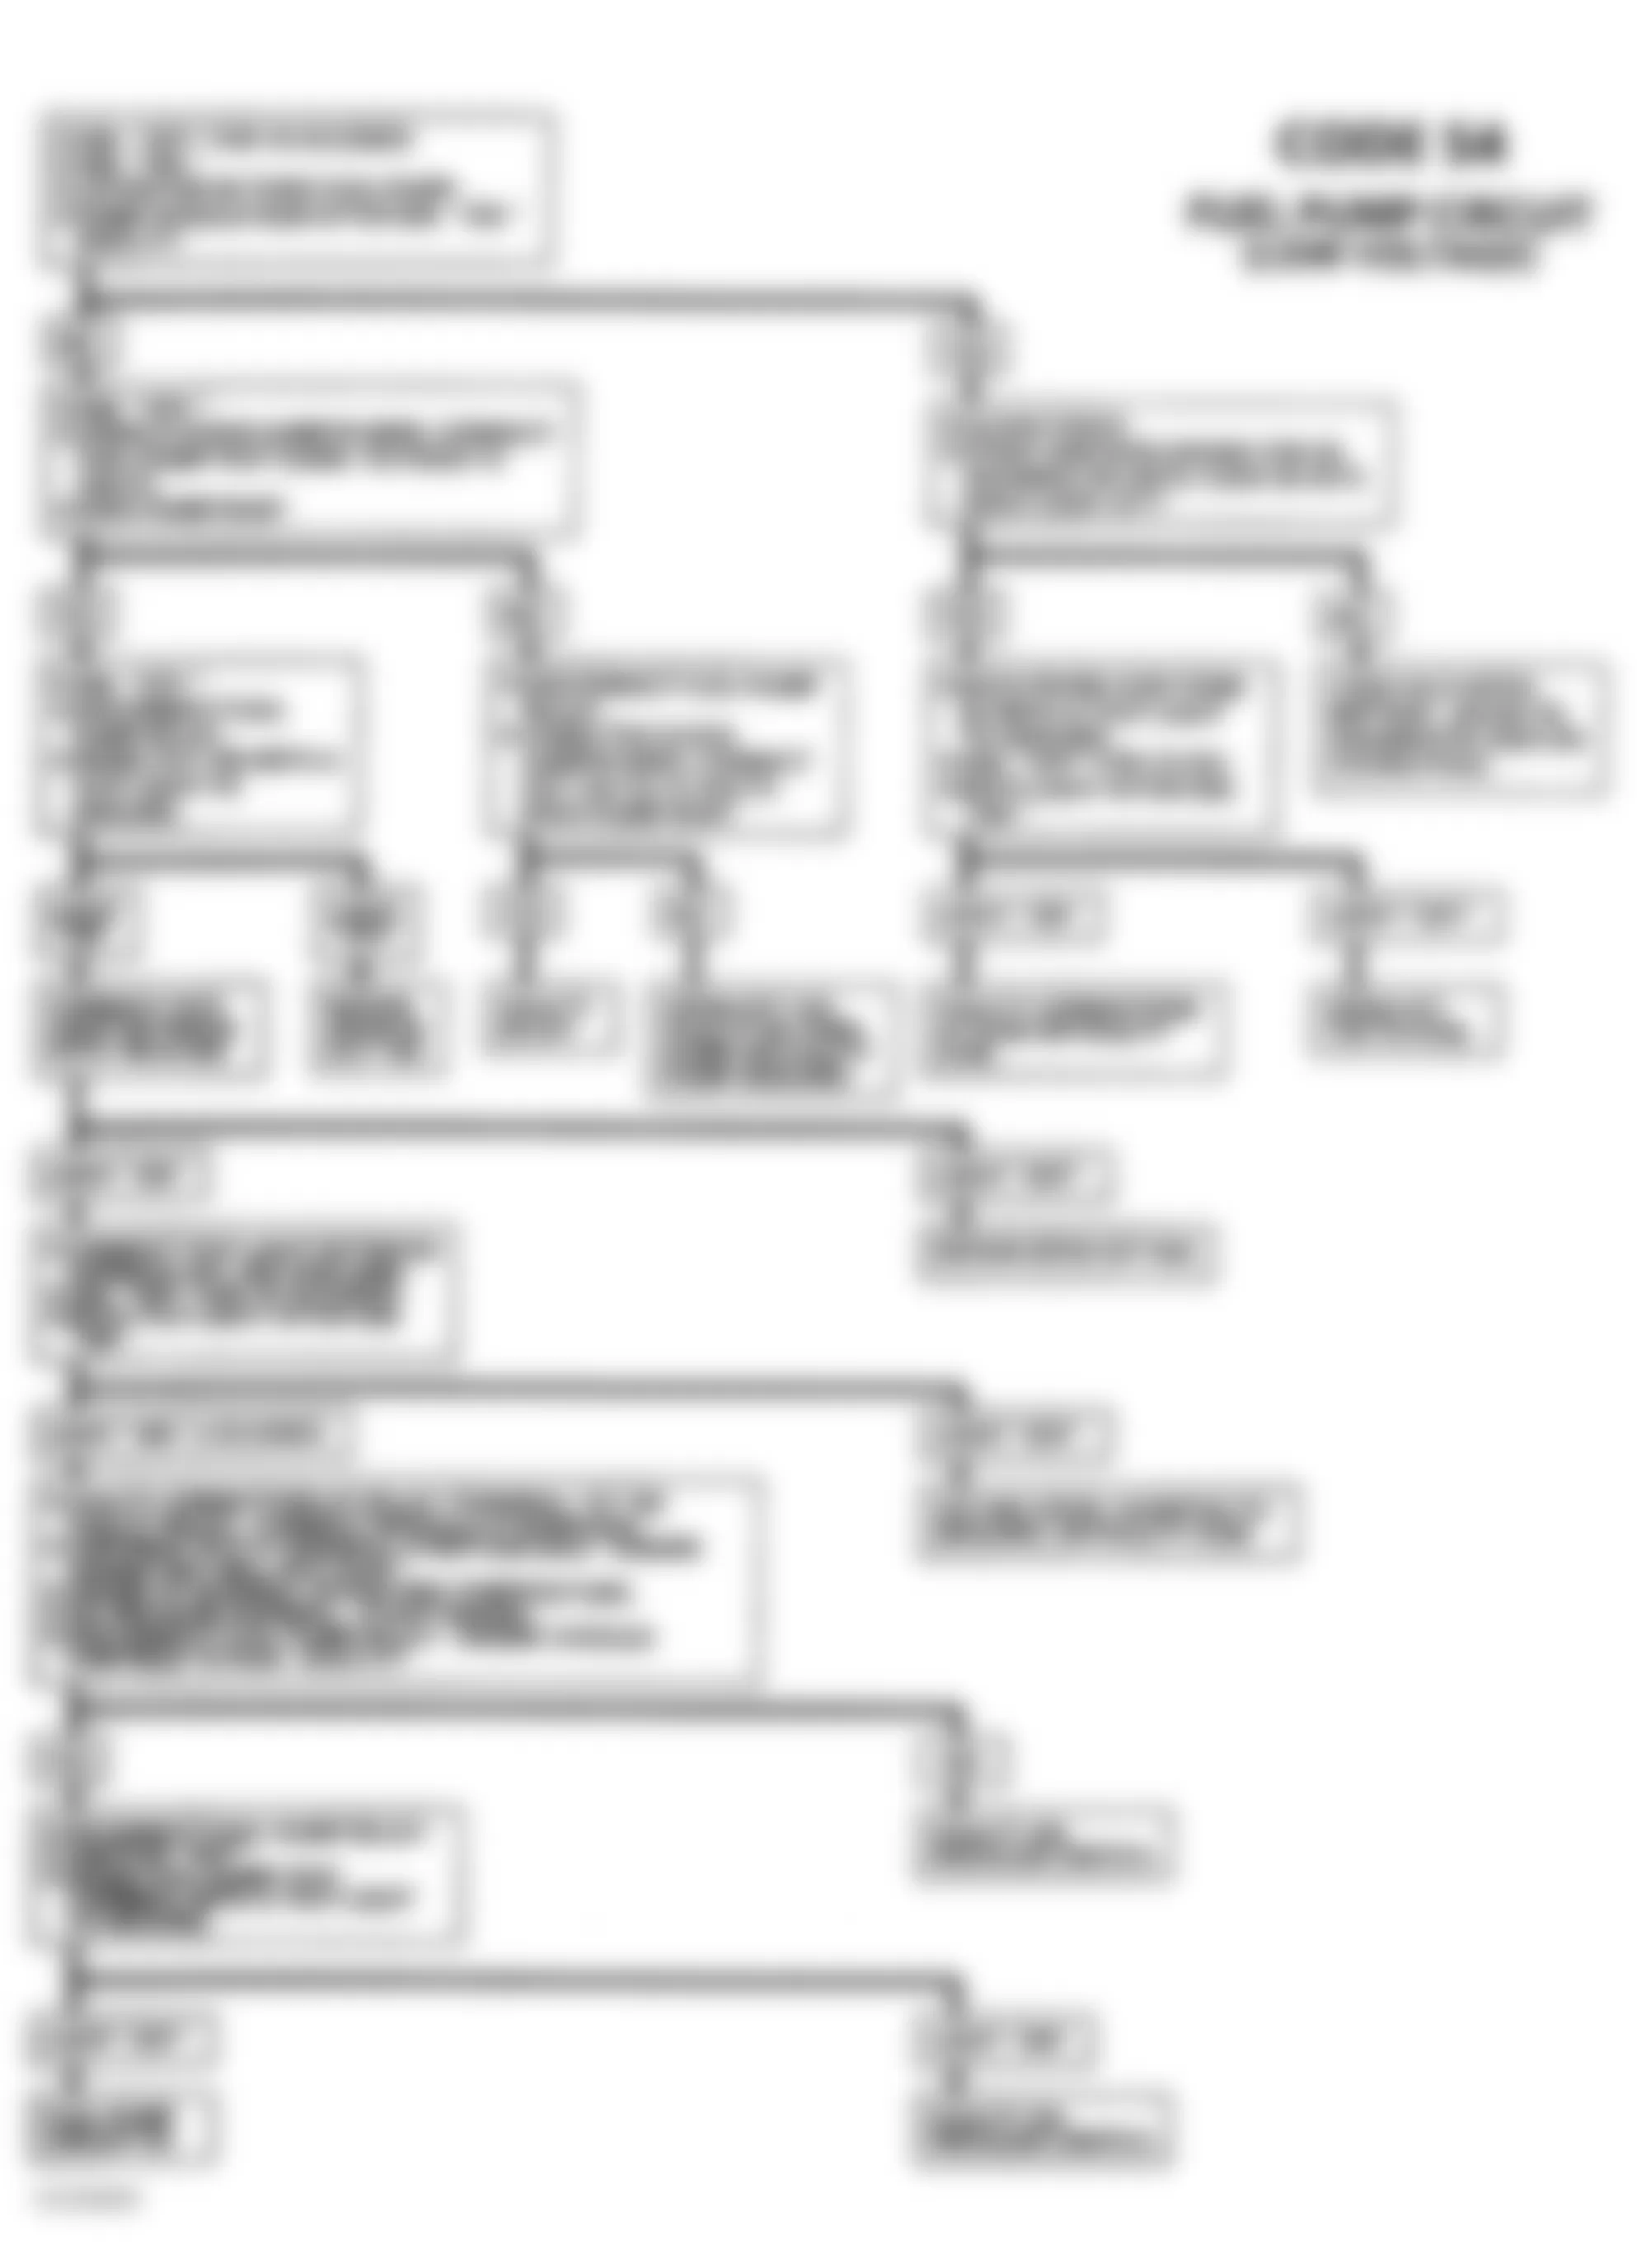 Chevrolet S10 Blazer 1991 - Component Locations -  Code 54 Diagnostic Flow Chart (S & T Series Only)